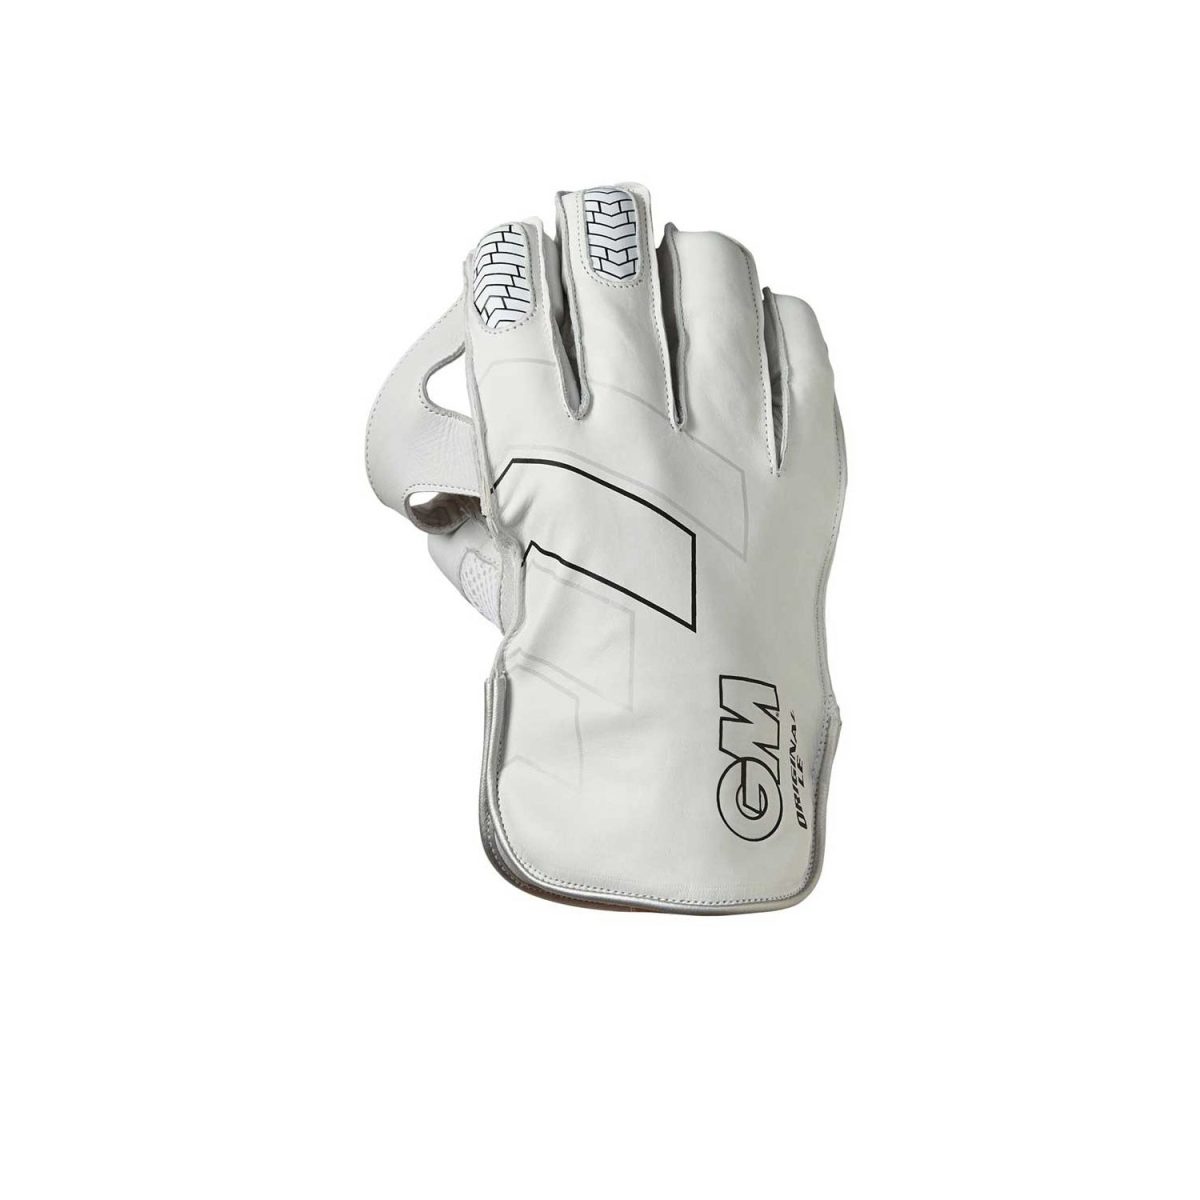 --1le-wicket-keeping-gloves-1